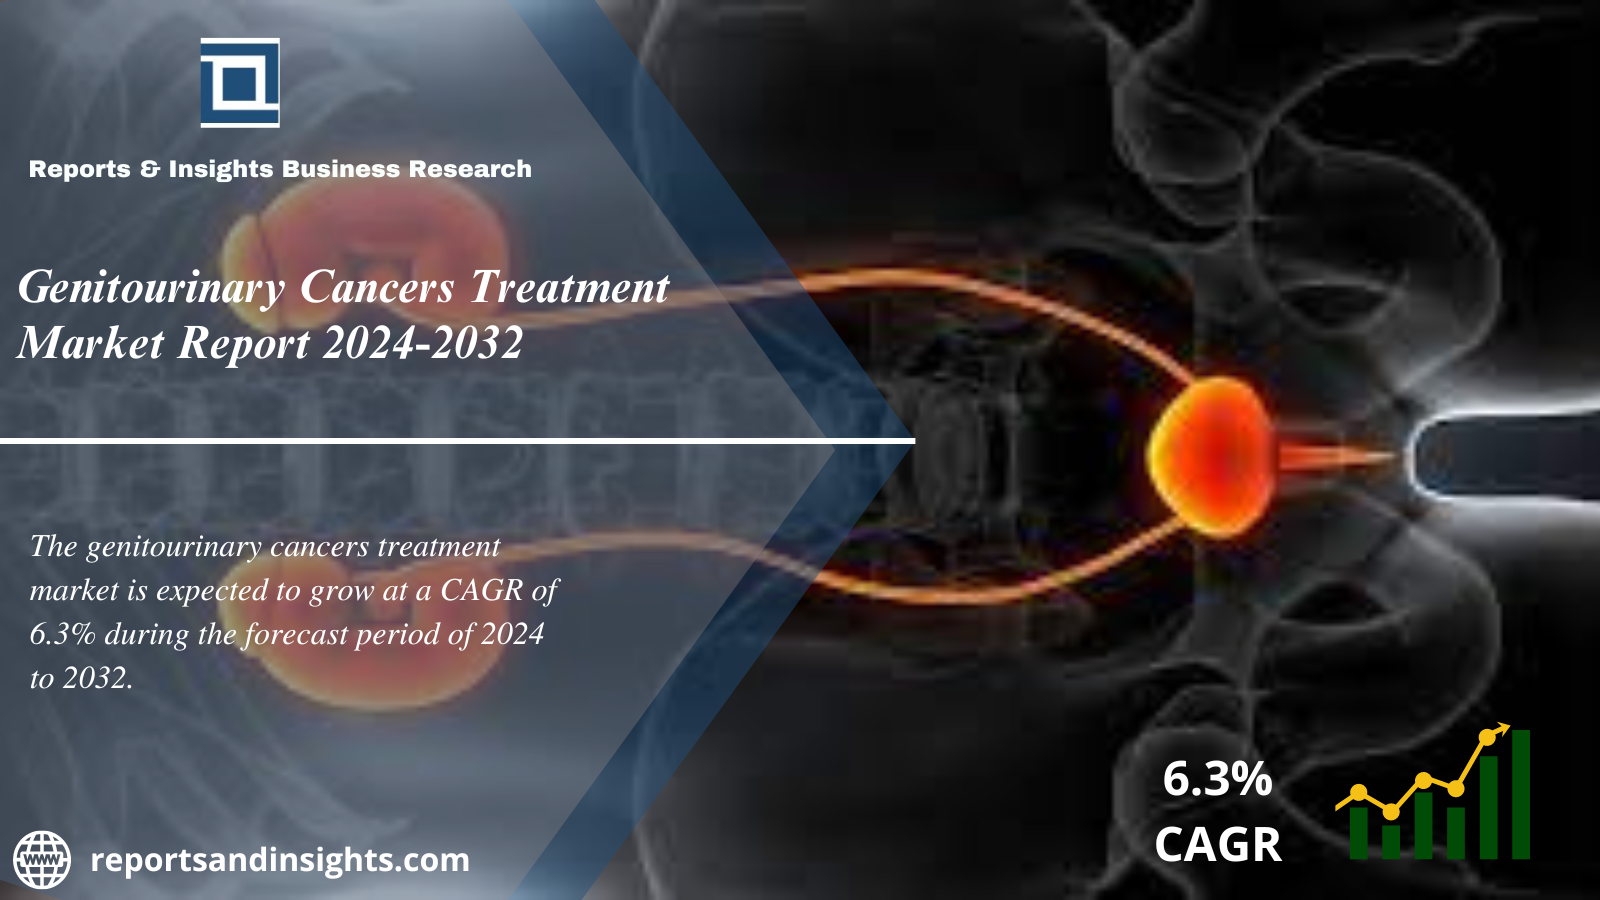 Genitourinary Cancers Treatment Market Share, Price Trends, Size, Industry Analysis Report and Forecast 2024 to 2032